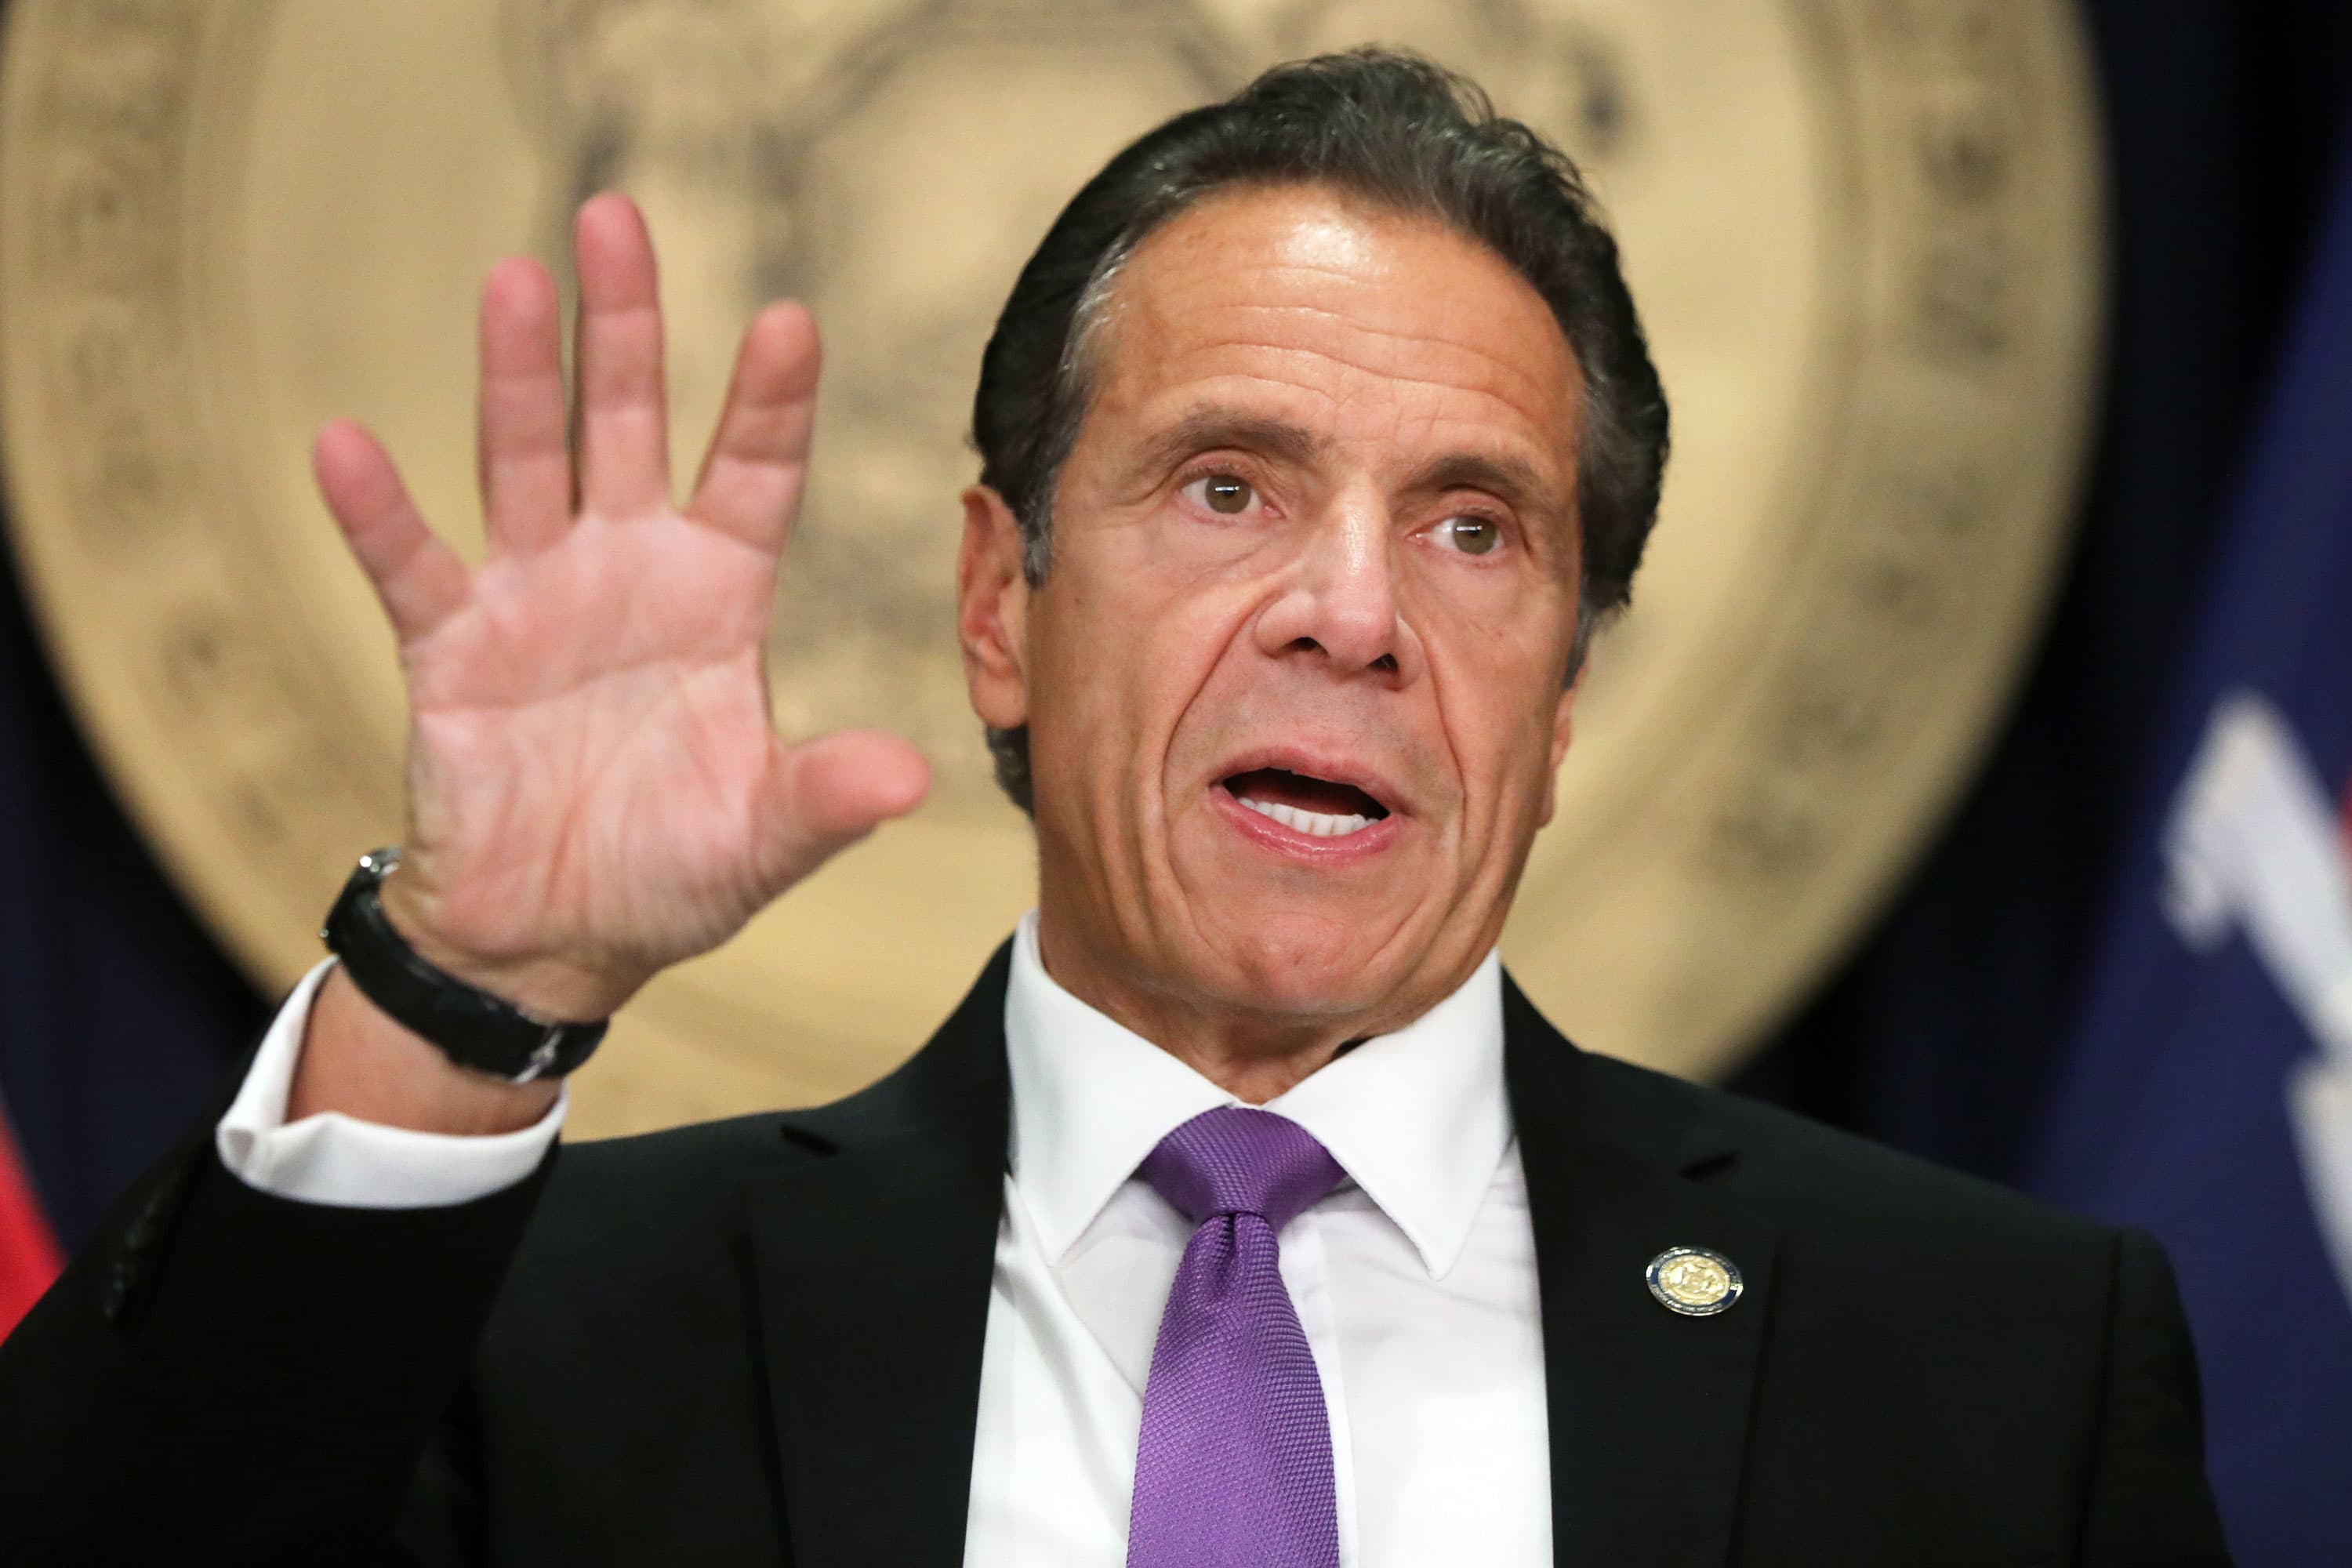 250 CEOs and execs express 'alarm' over what could become the largest tax hike in New York history